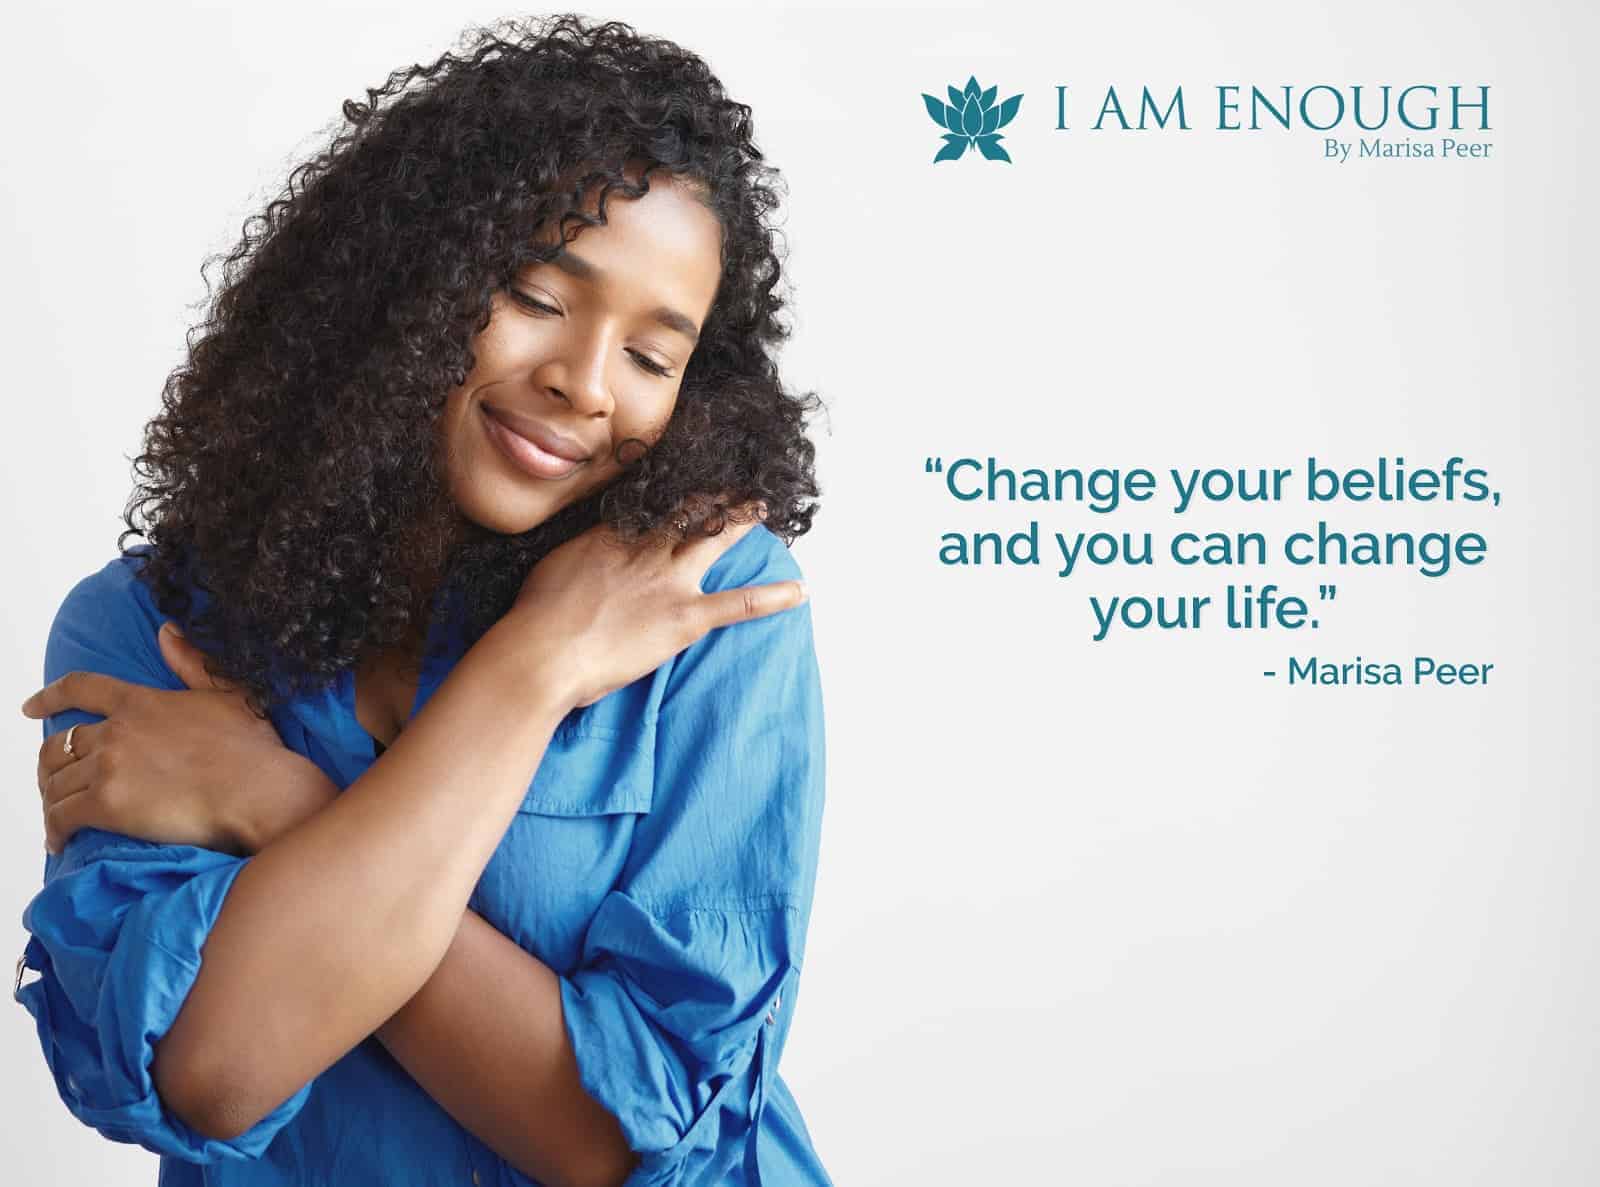 Change your beliefs and unleash your full potential